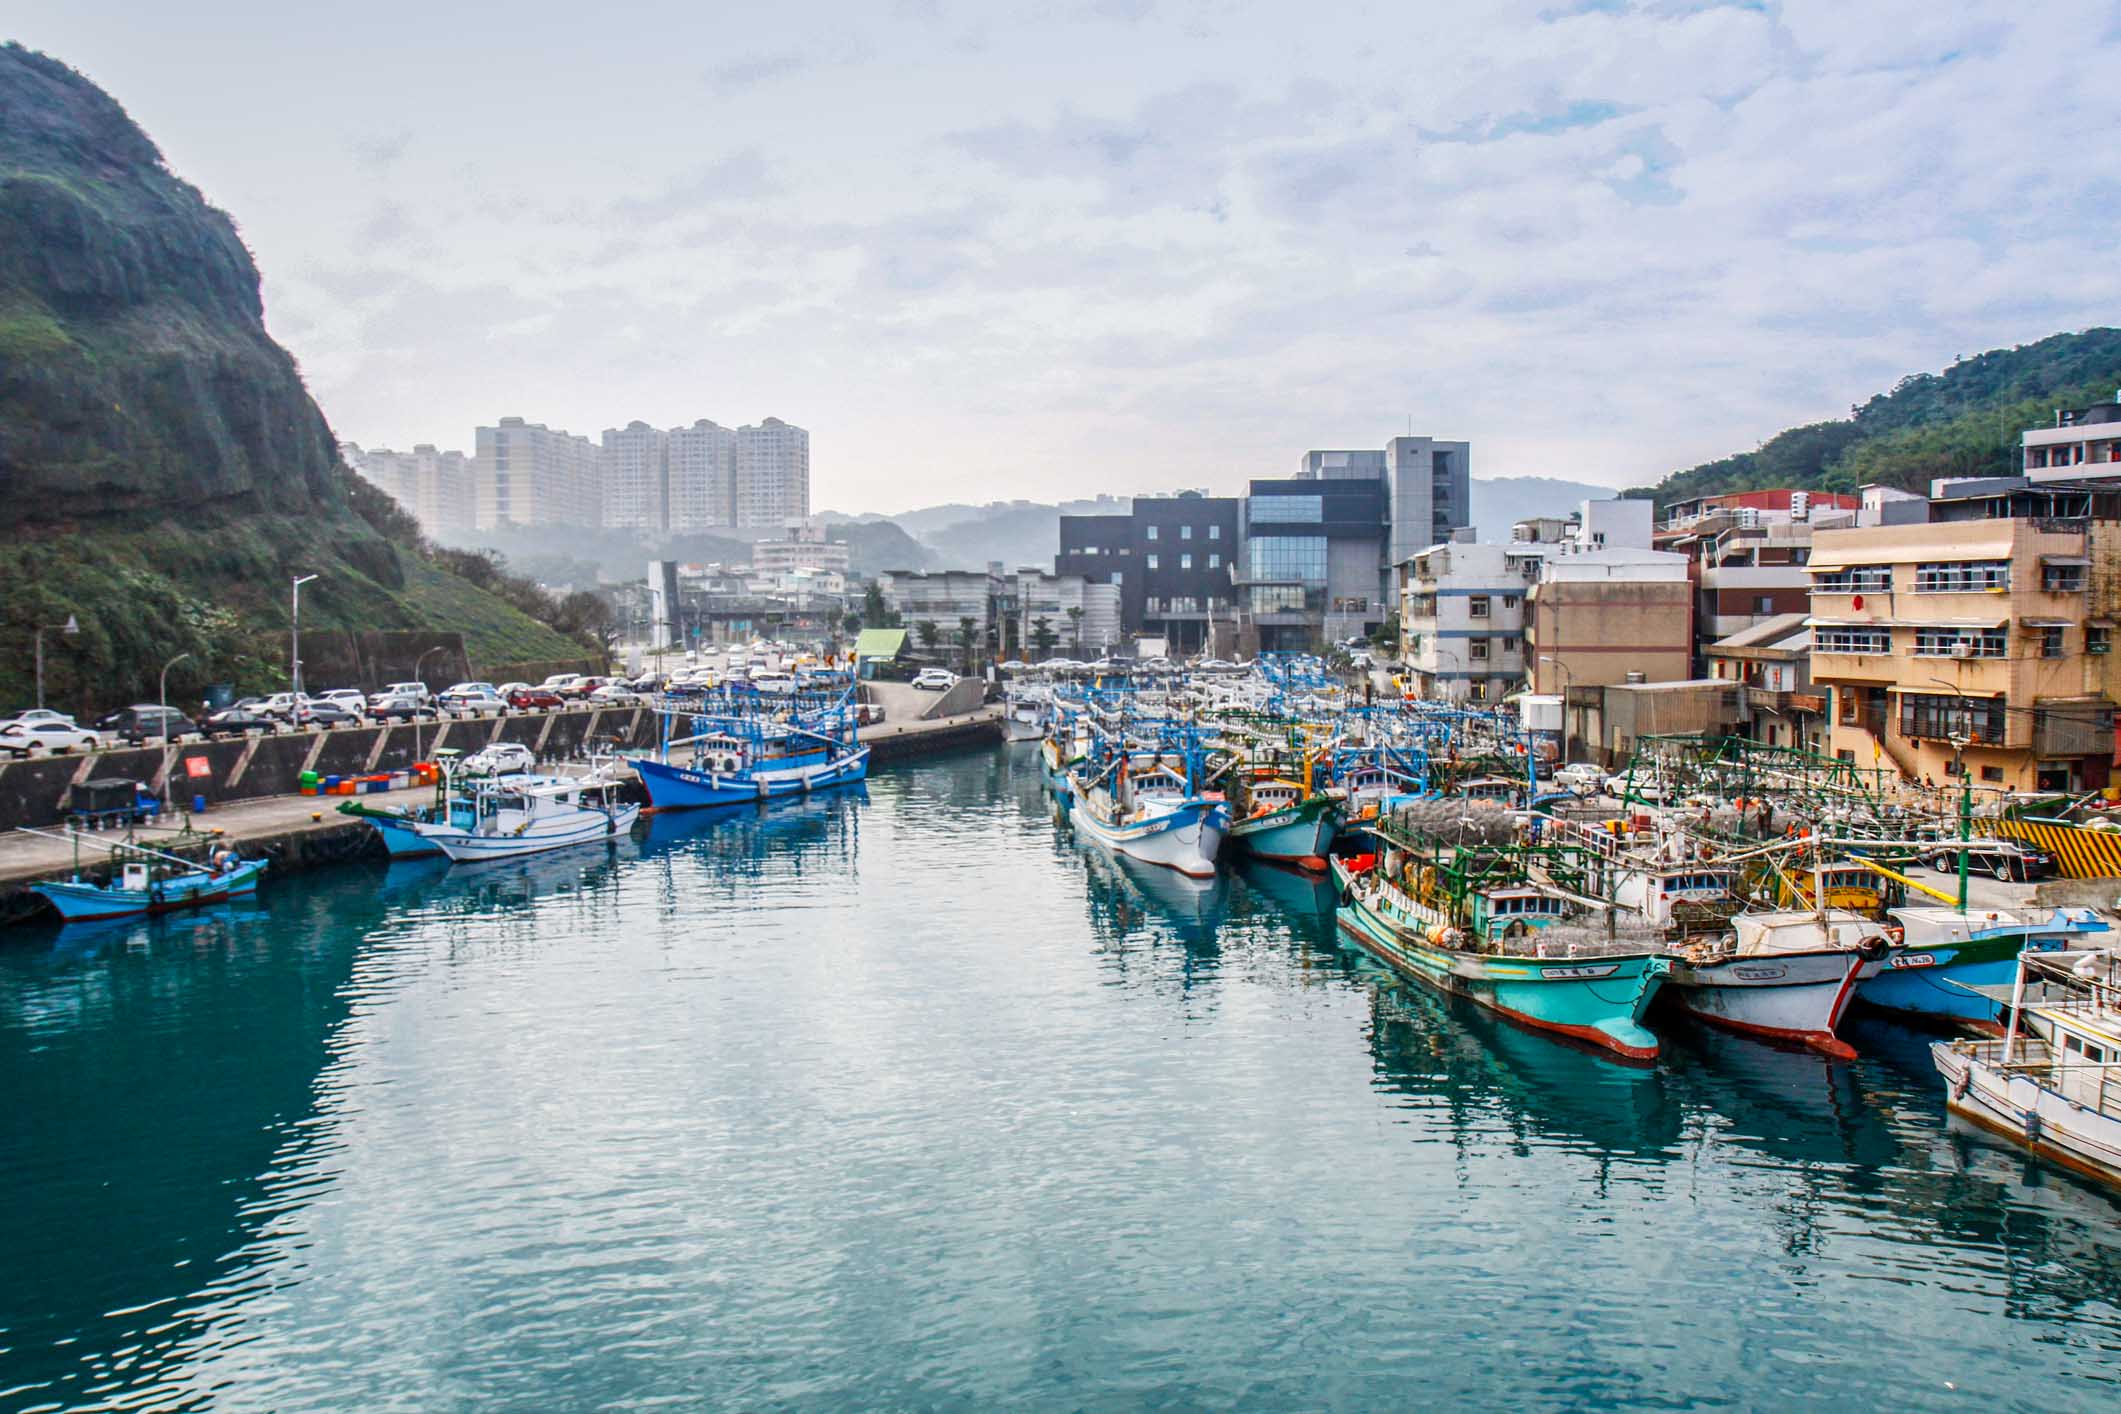 Keelung Taiwan – A Seafood Paradise Just North of Taipei